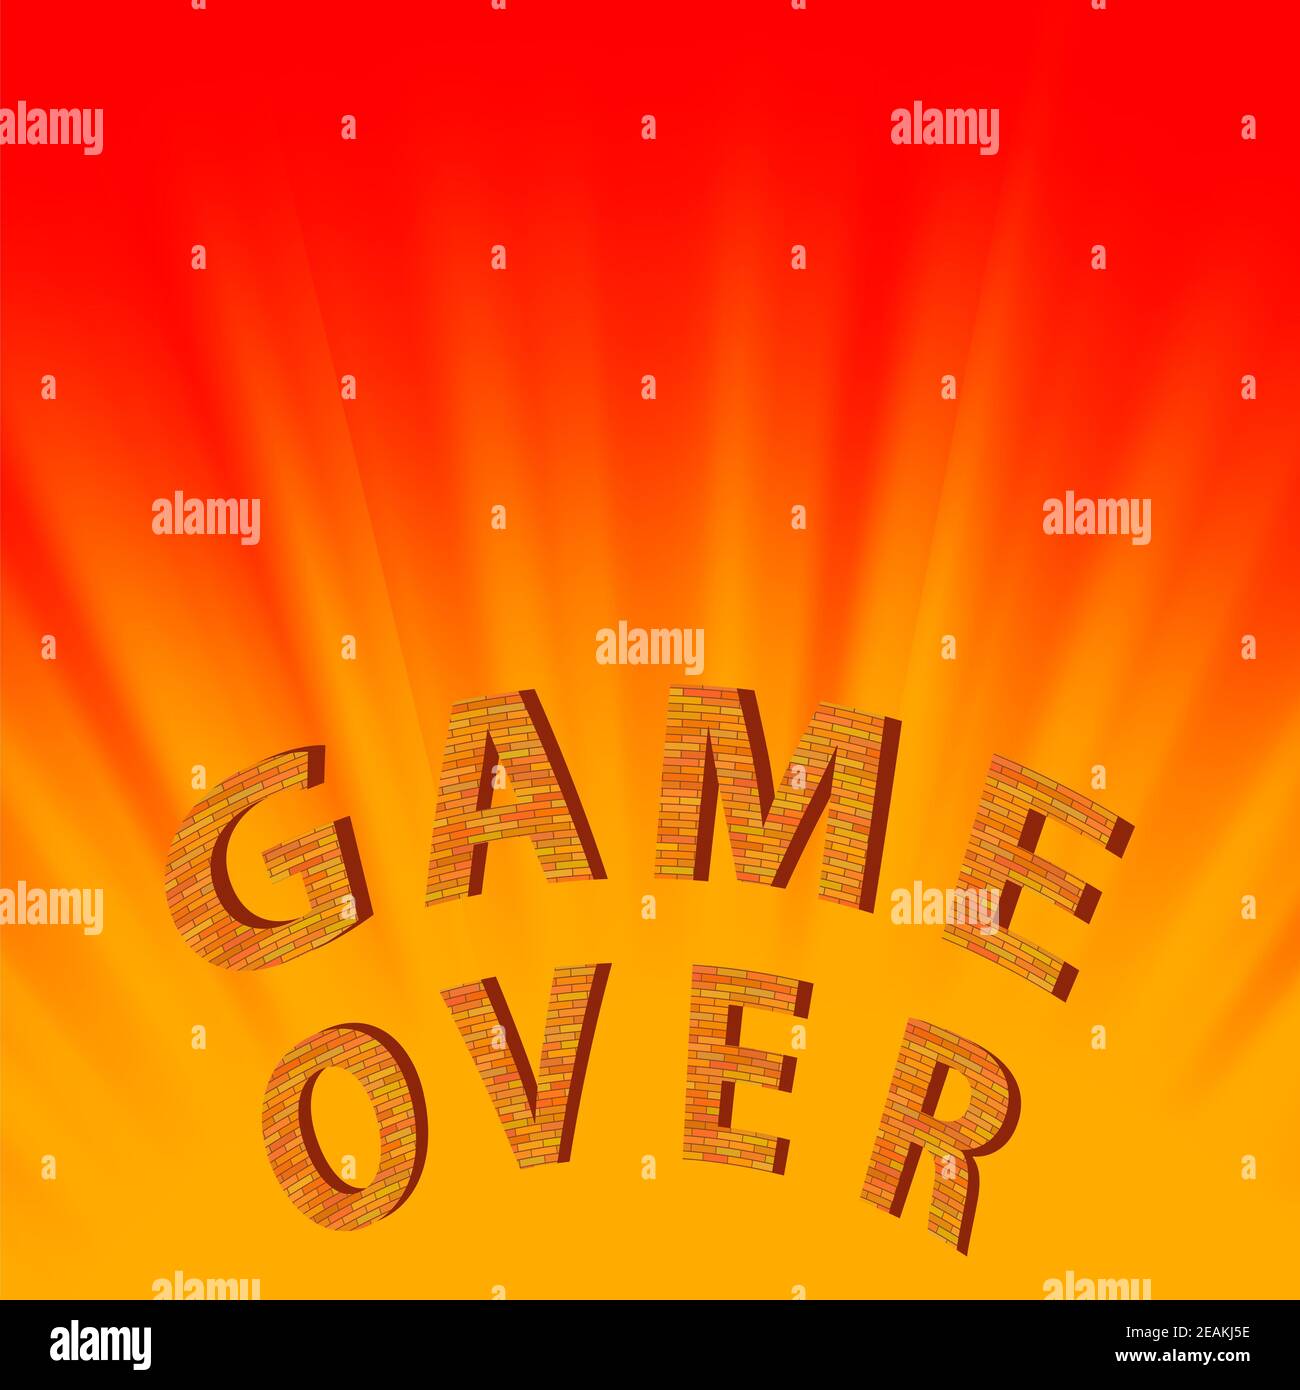 Retro Pixel Game Over Sign on Red Yellow Background. Gaming Concept. Video Game Screen Stock Photo